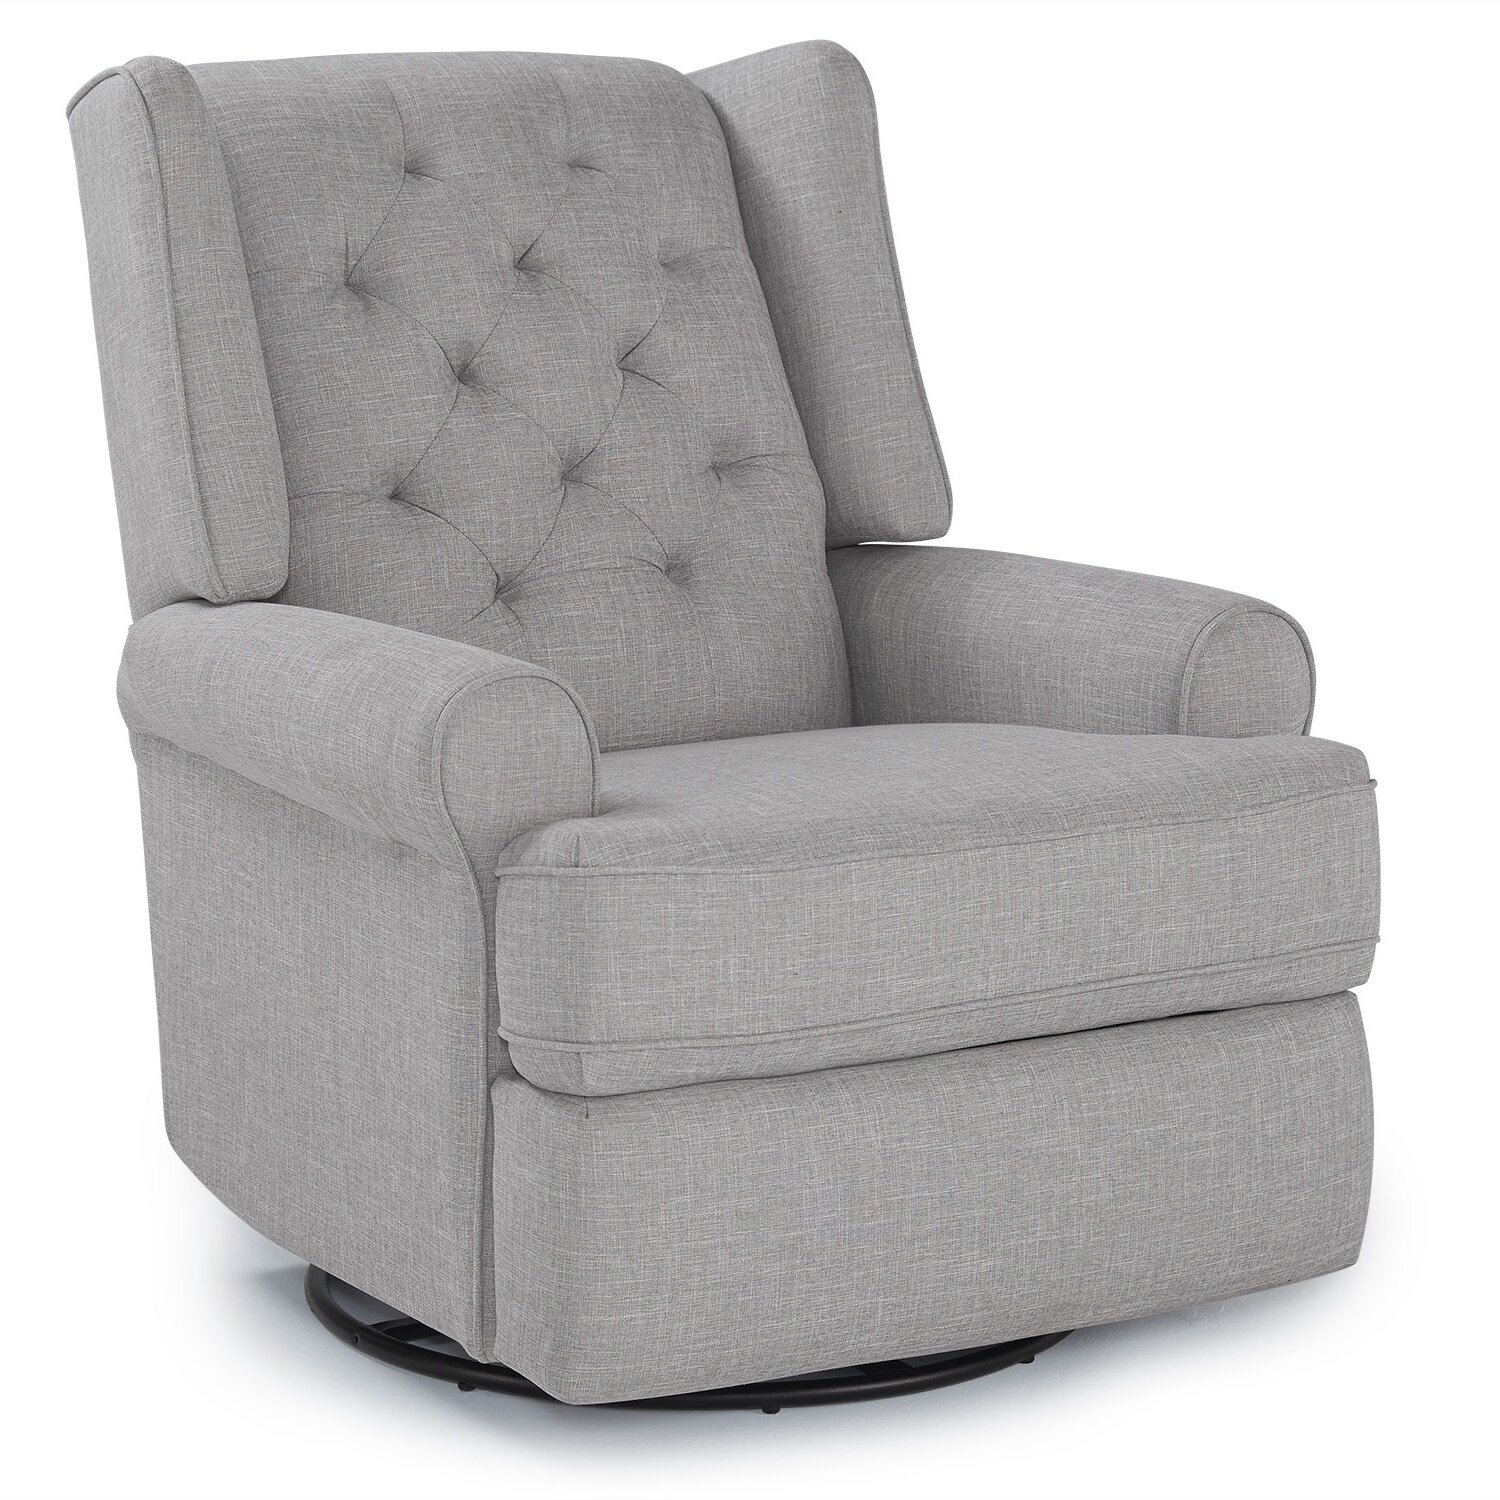 White Nursery Gliders Rockers Recliners Free Shipping Over 35 Wayfair